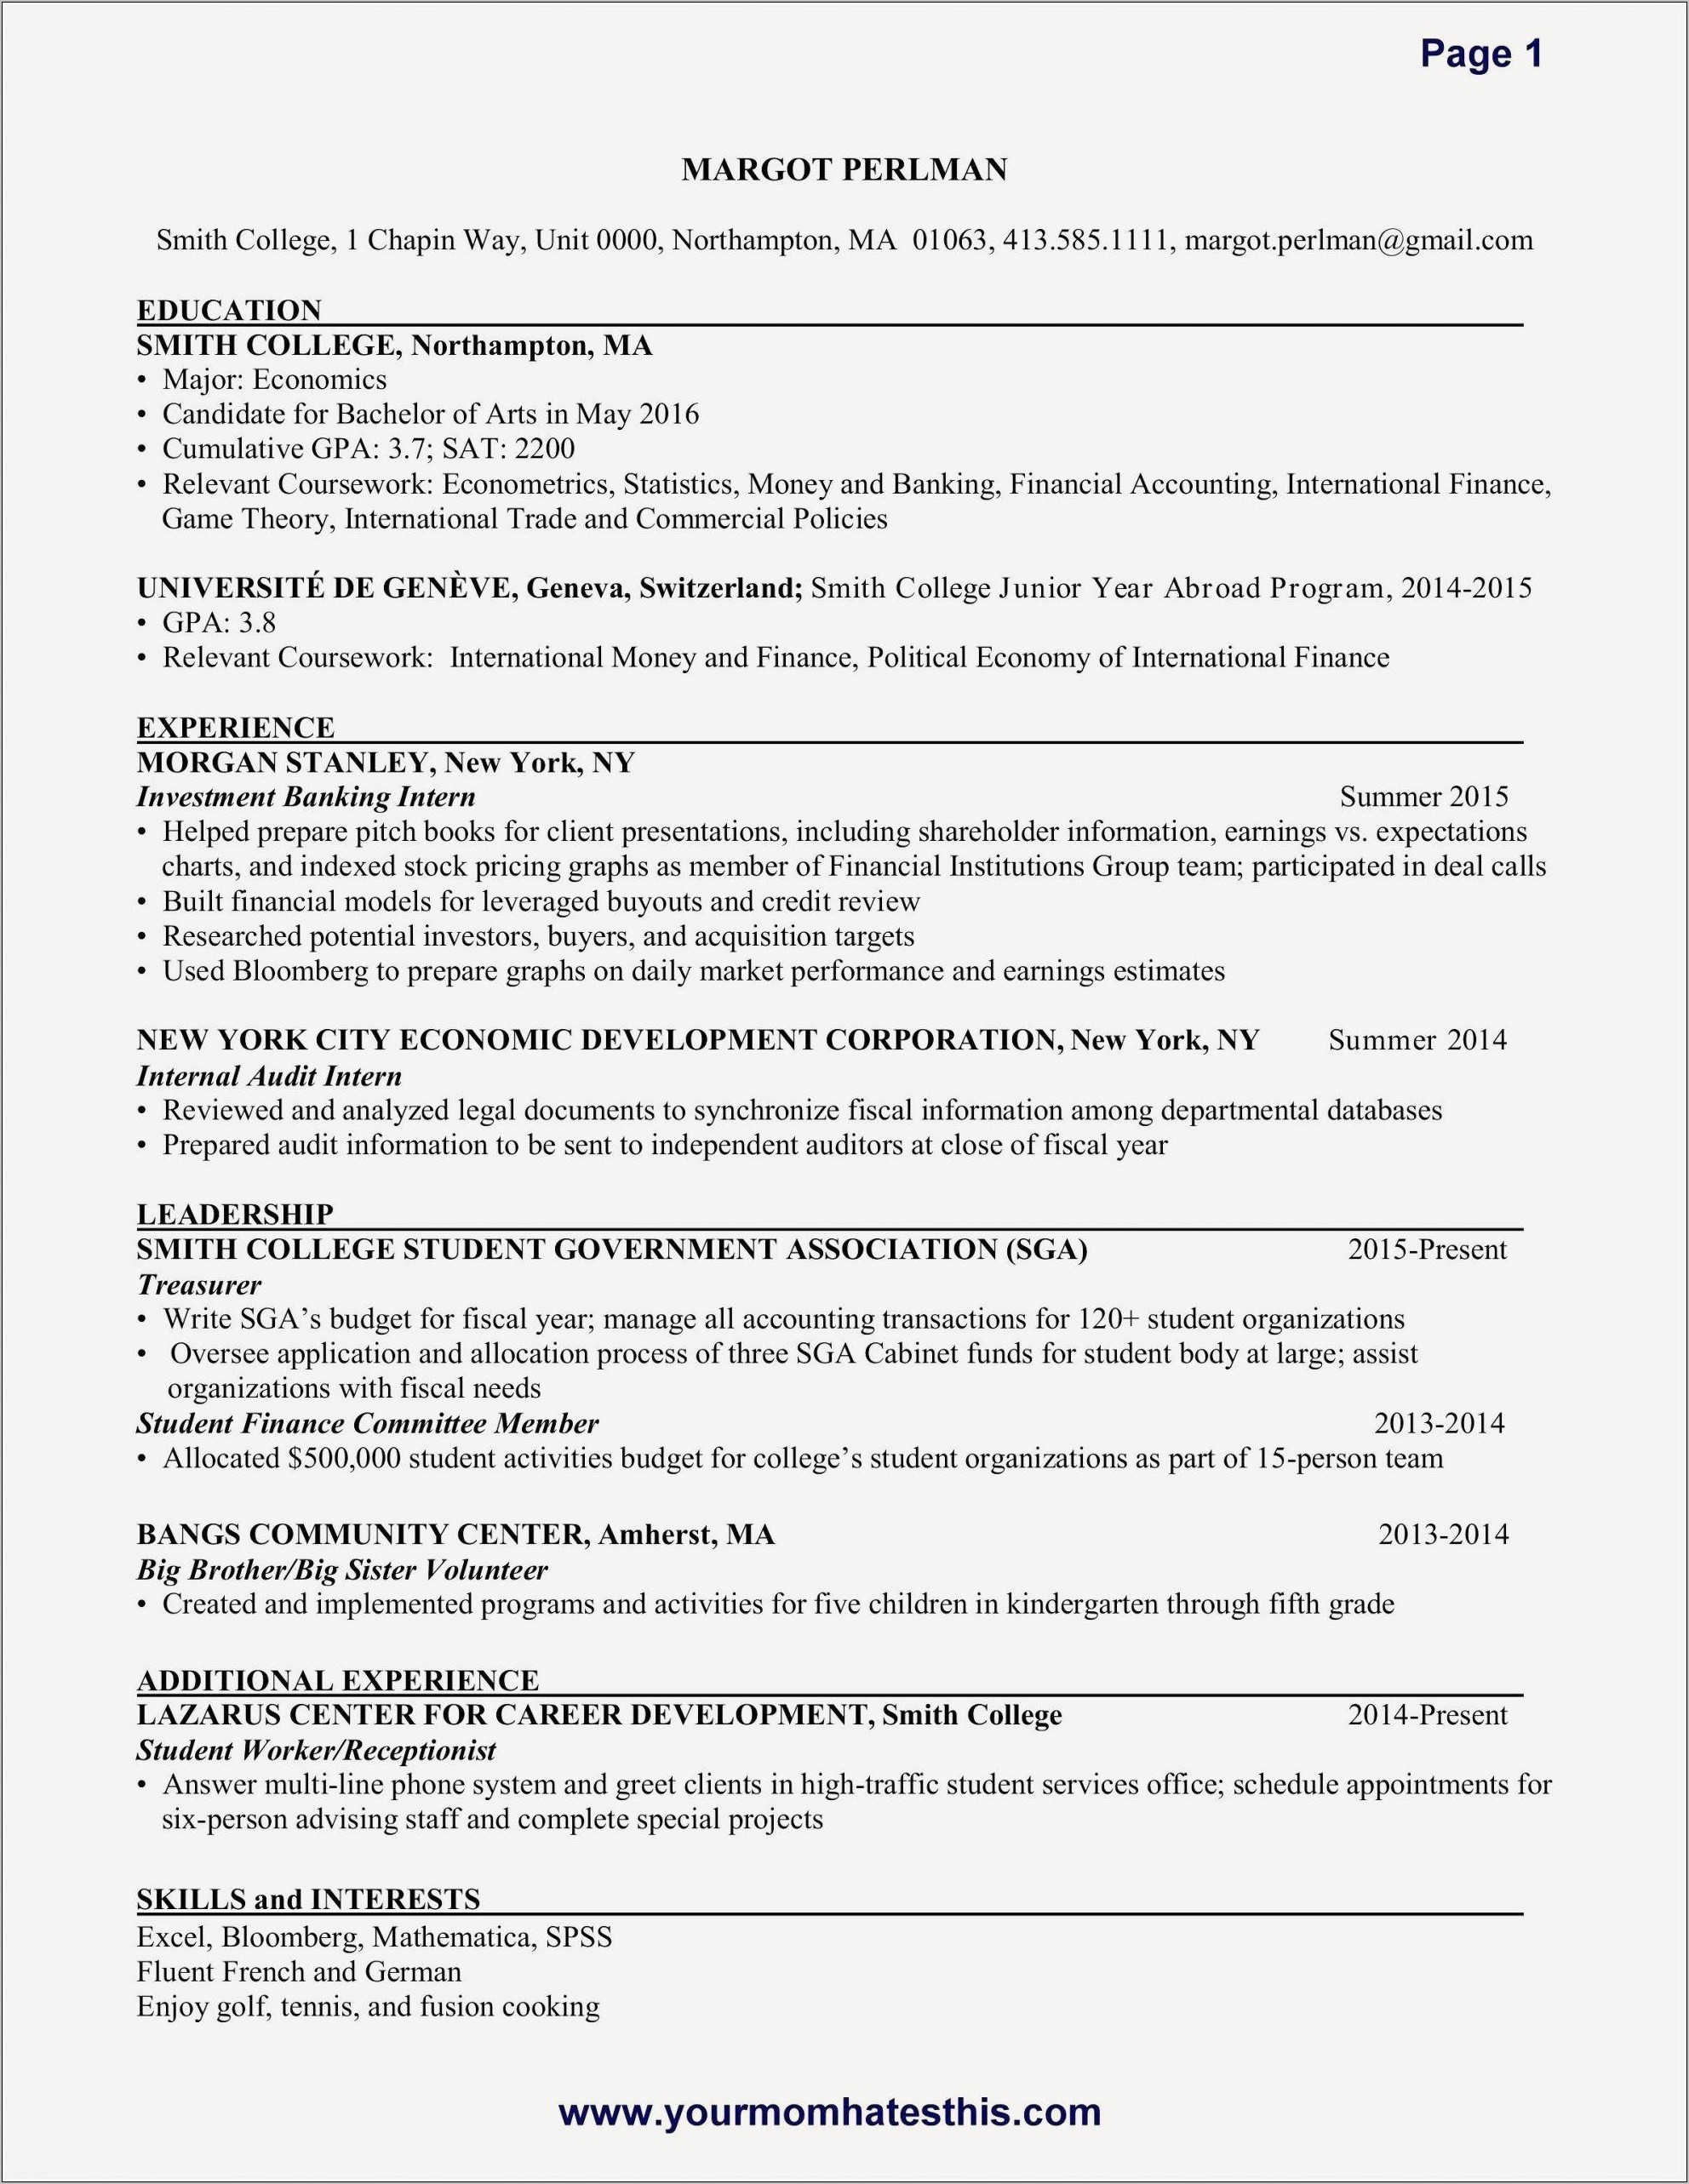 Skills Part Of Resume Includes For Internship